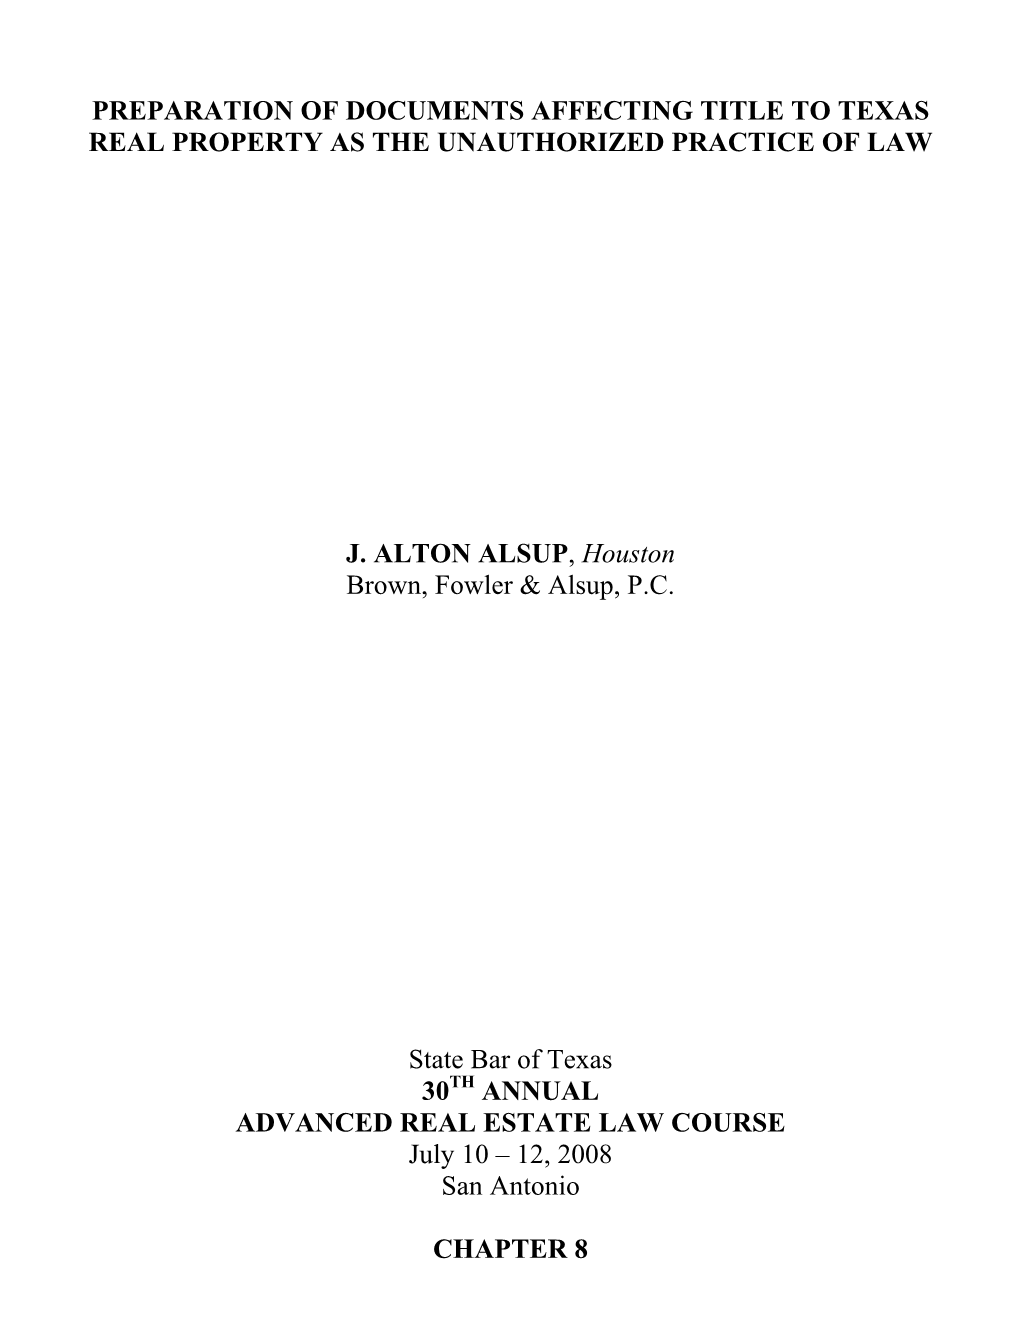 PREPARATION of DOCUMENTS AFFECTING TITLE to TEXAS REAL PROPERTY AS the UNAUTHORIZED PRACTICE of LAW J. ALTON ALSUP, Houston Brow